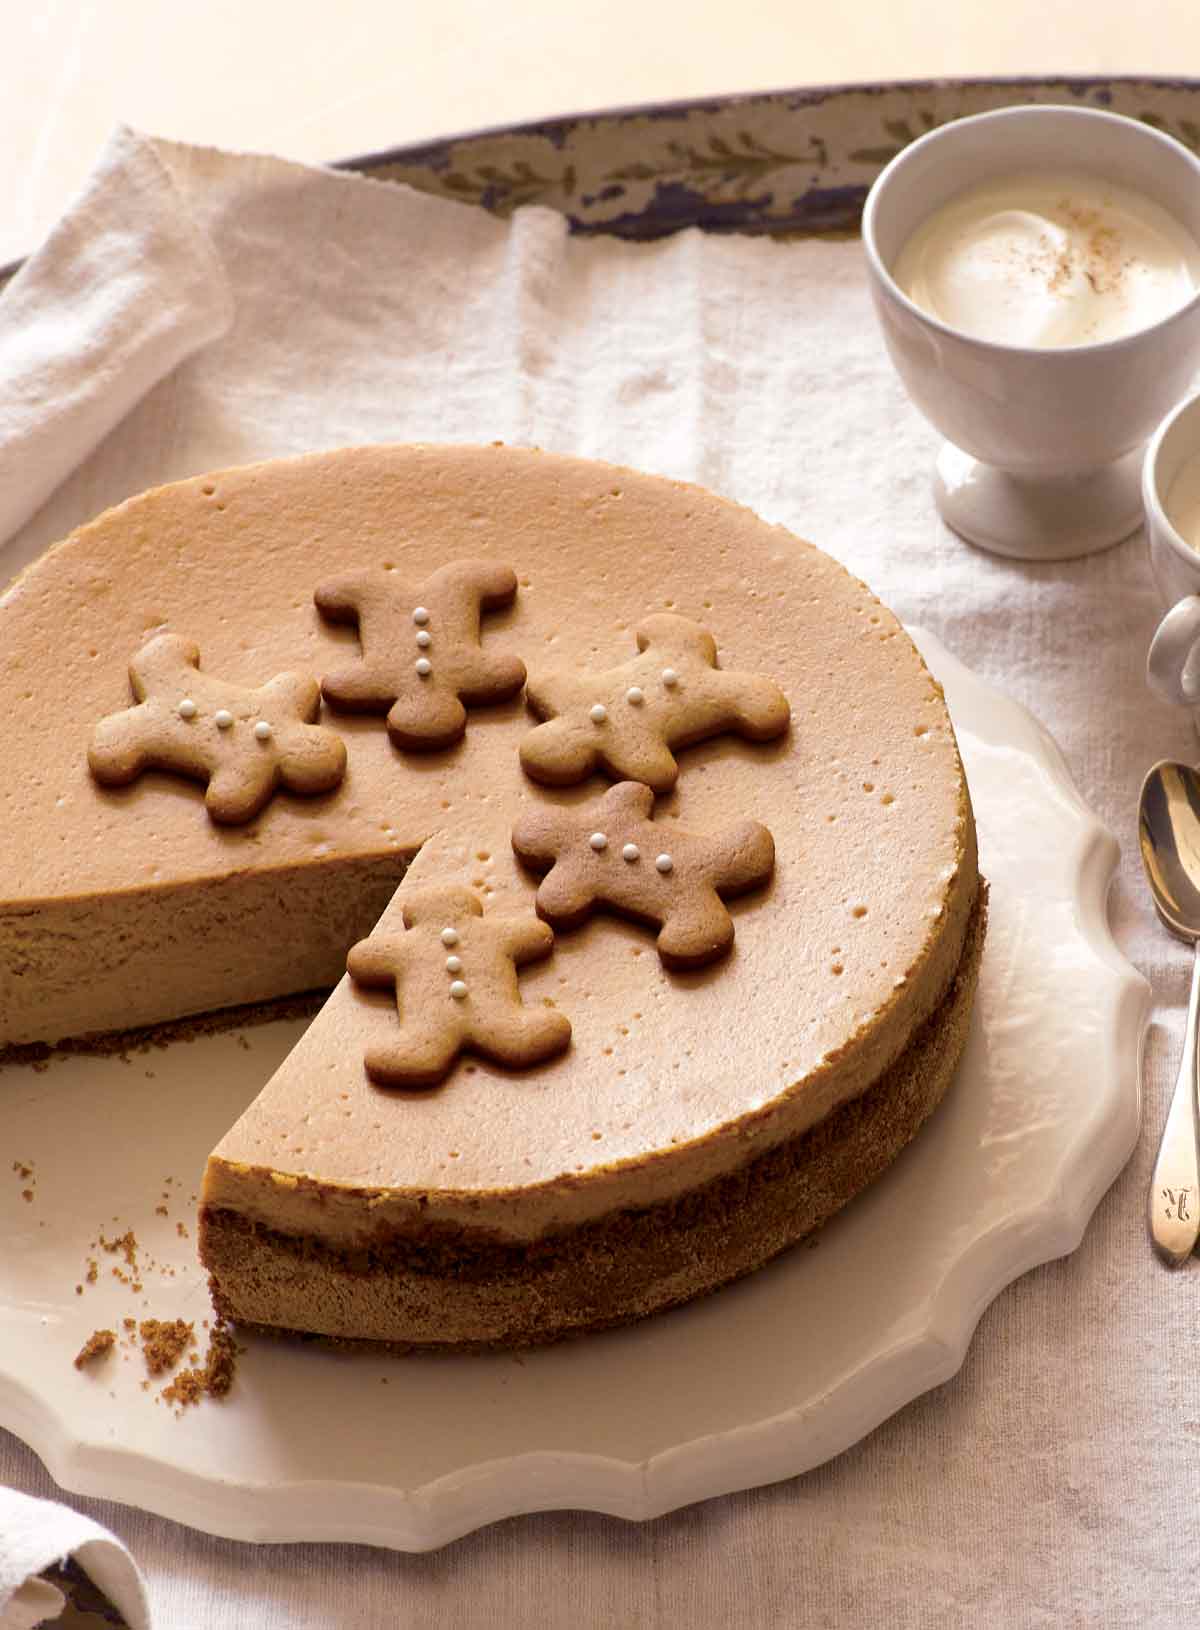 Gingerbread cookies, both molasses and honey, in a circle on top of a gingerbread cheesecake, beside cups of latte and spoons.